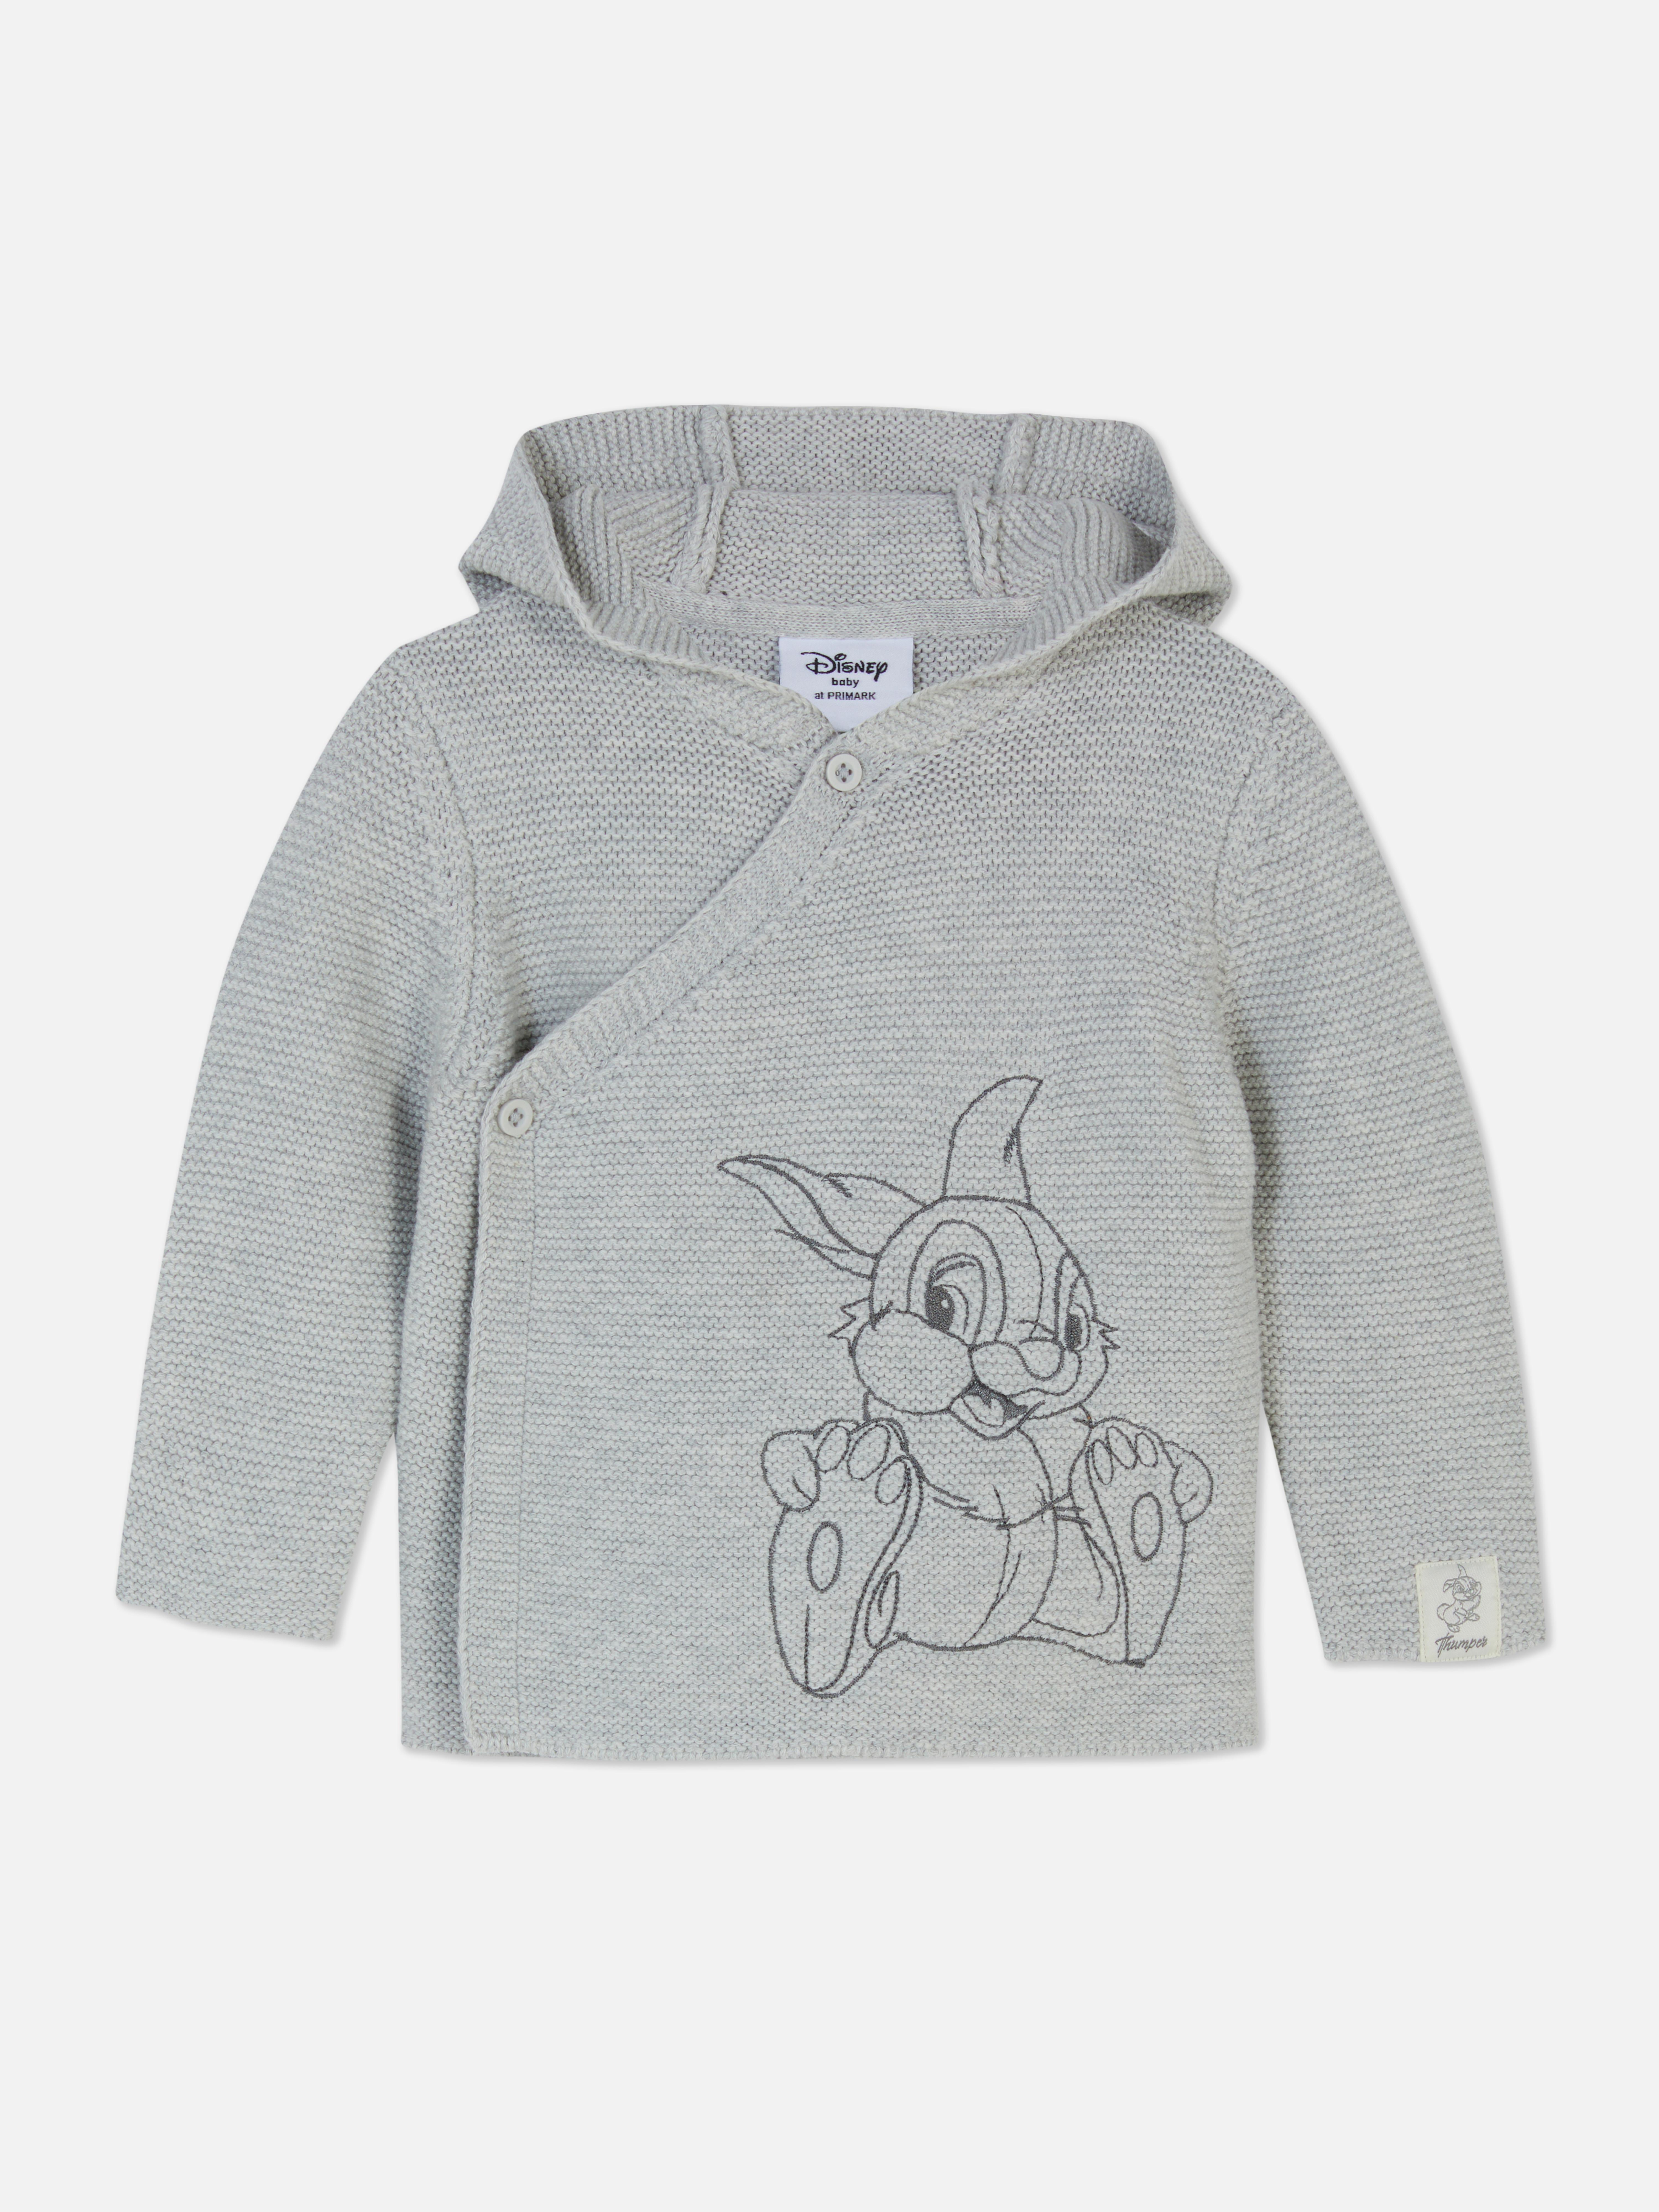 Disney’s Bambi and Thumper Hooded Cardigan